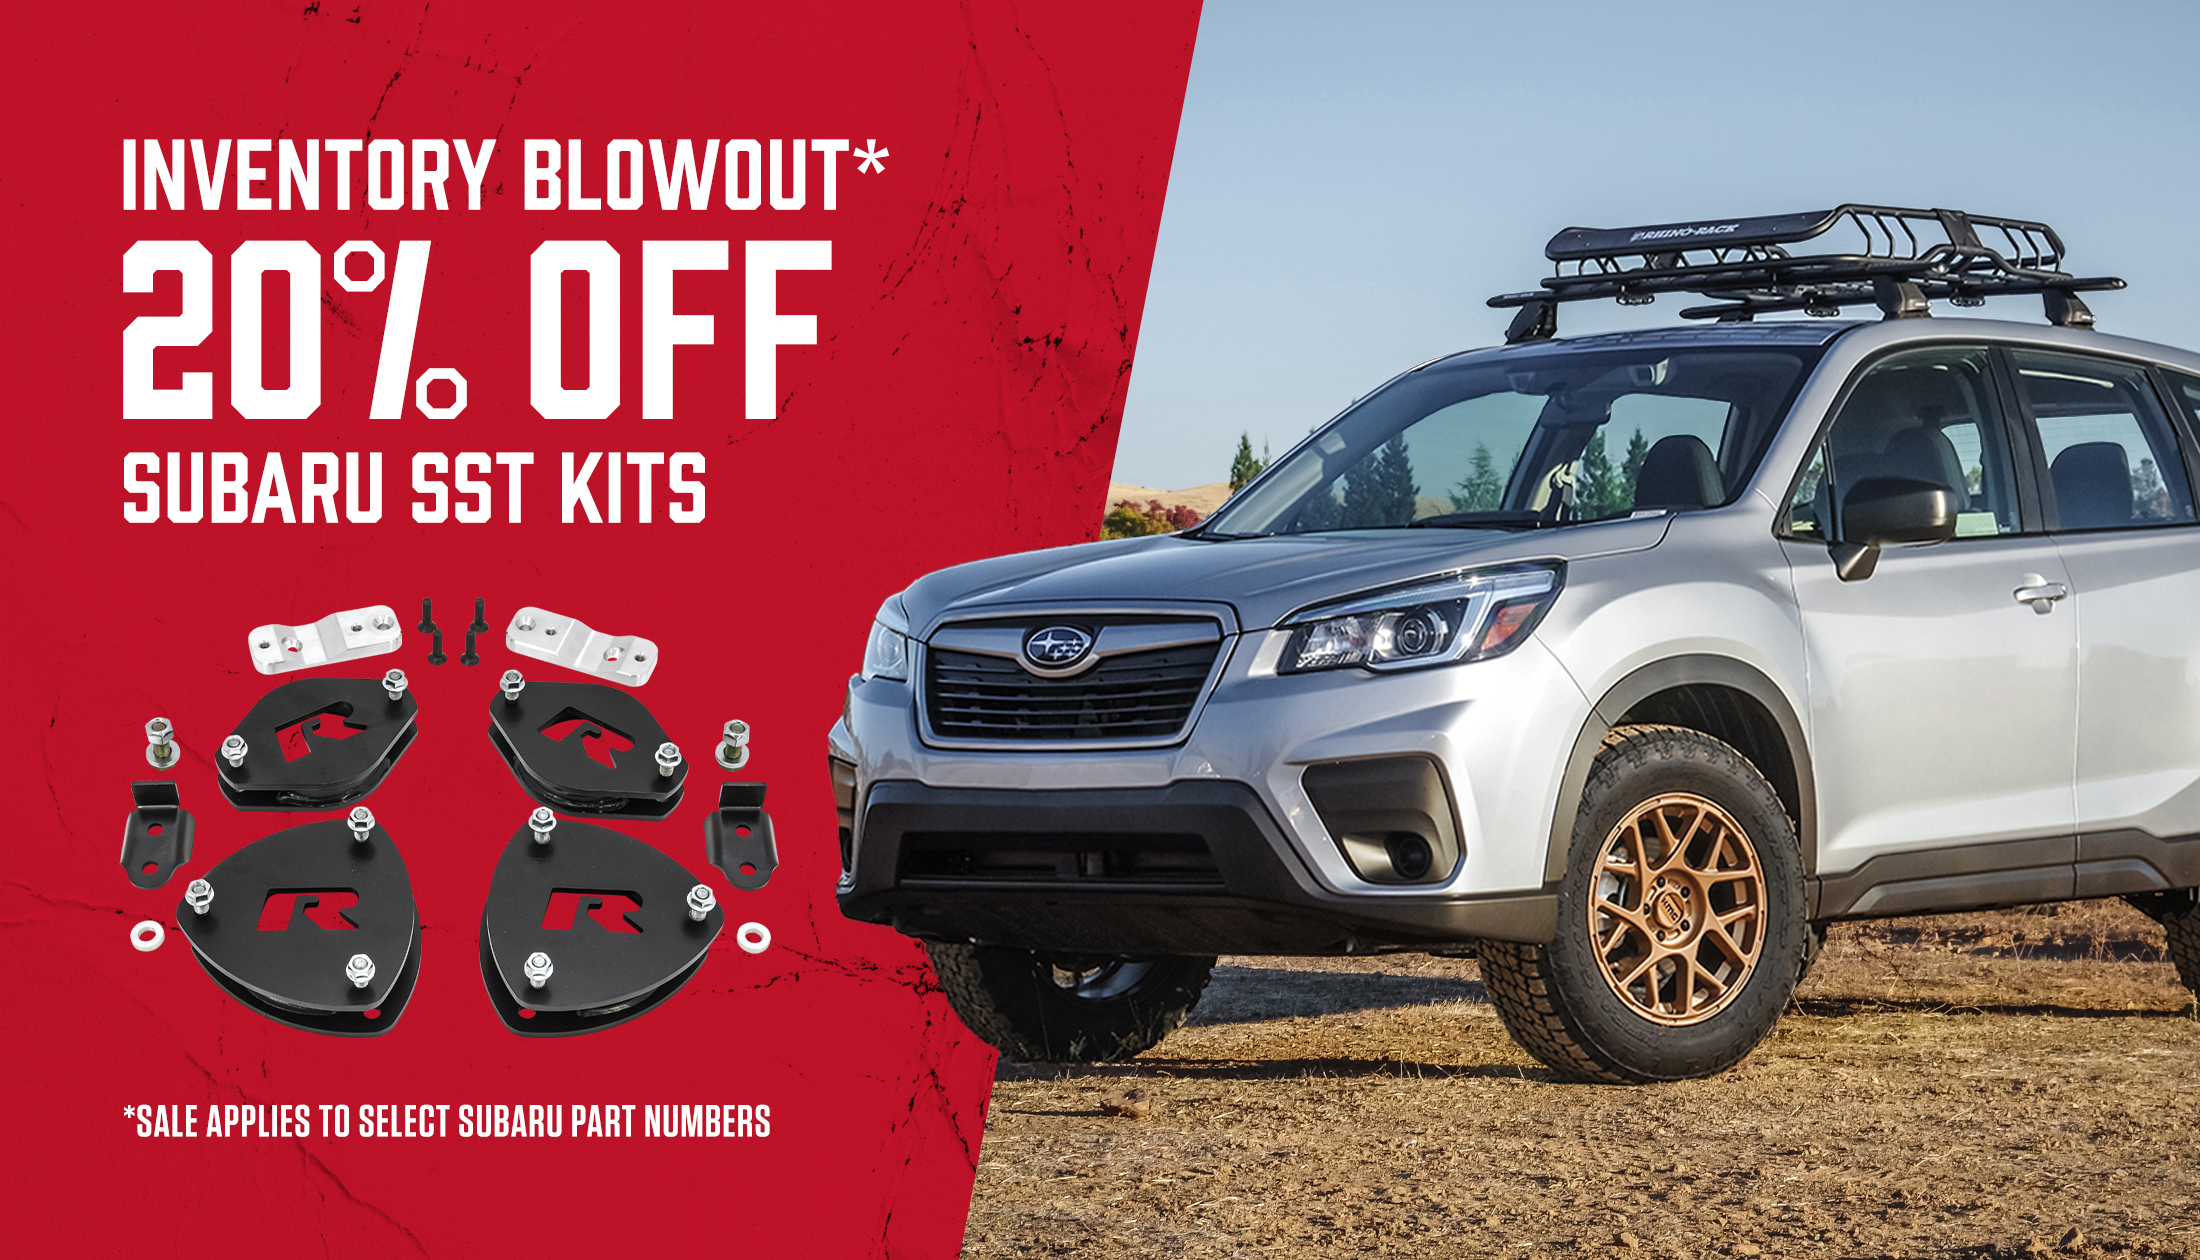 ReadyLIFT is excited to announce an inventory blowout sale on select Subaru SST Kits.